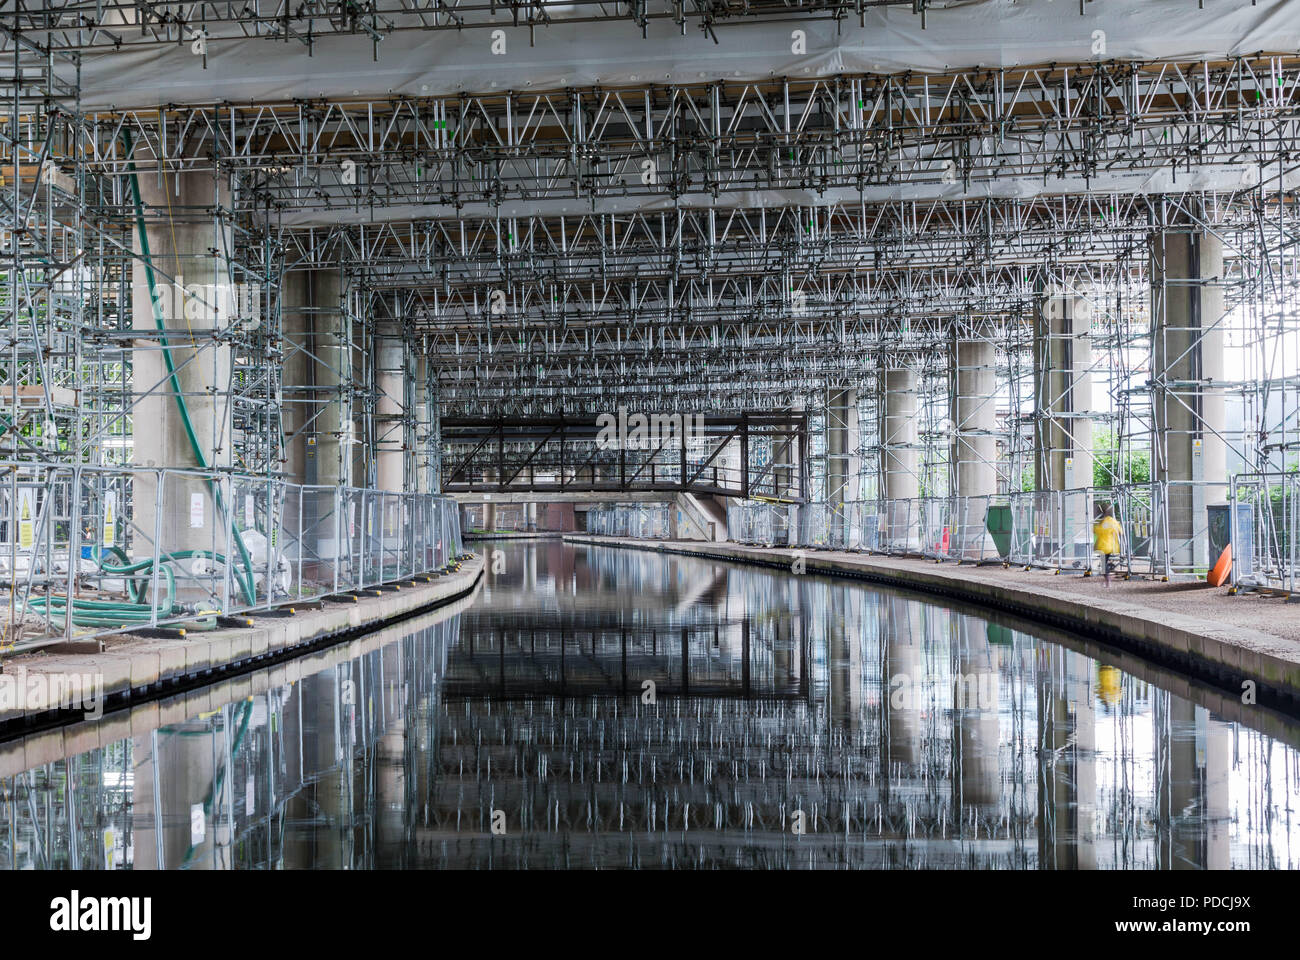 Oldbury, West Midlands, UK. 9th August, 2018. A two-year repair project on the elevated section of the M5 motorway passes its halfway mark. Scaffolding is reflected in the canal. At more than £100 million, M5 Oldbury is believed to be the largest concrete repair project, by value, ever carried out in Britain. Already more than 5,000 separate repairs have been carried out on the southbound carriageway, 3,500 more than anticipated. The Oldbury viaduct carries 120,000 vehicles a day on one of Europe's busiest motorways, and vehicles are limited to 30mph. Peter Lopeman/Alamy Live News Stock Photo